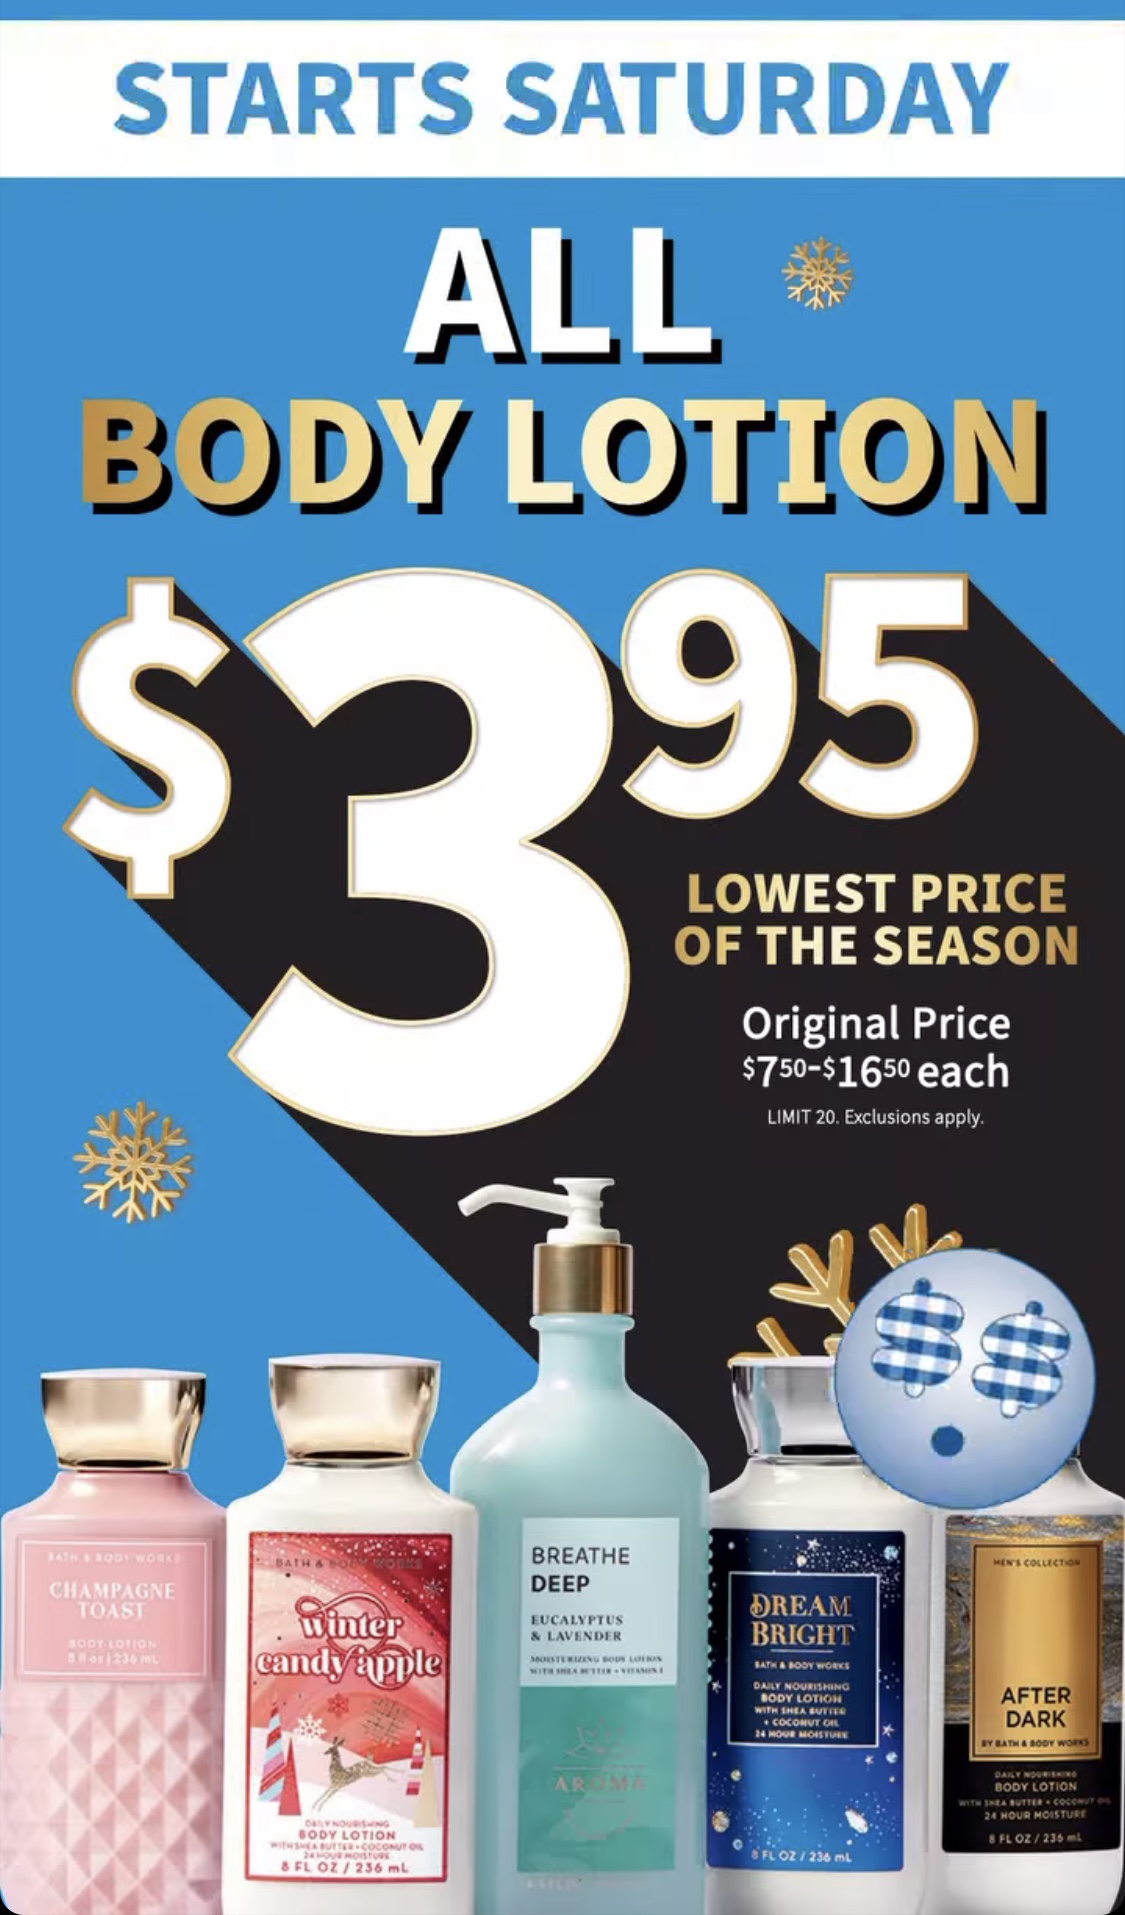 Life Inside the Page: Bath & Body Works | Thursday's Store Visit - For Saturday's Try It Believe It Body Lotion Sale $3.95